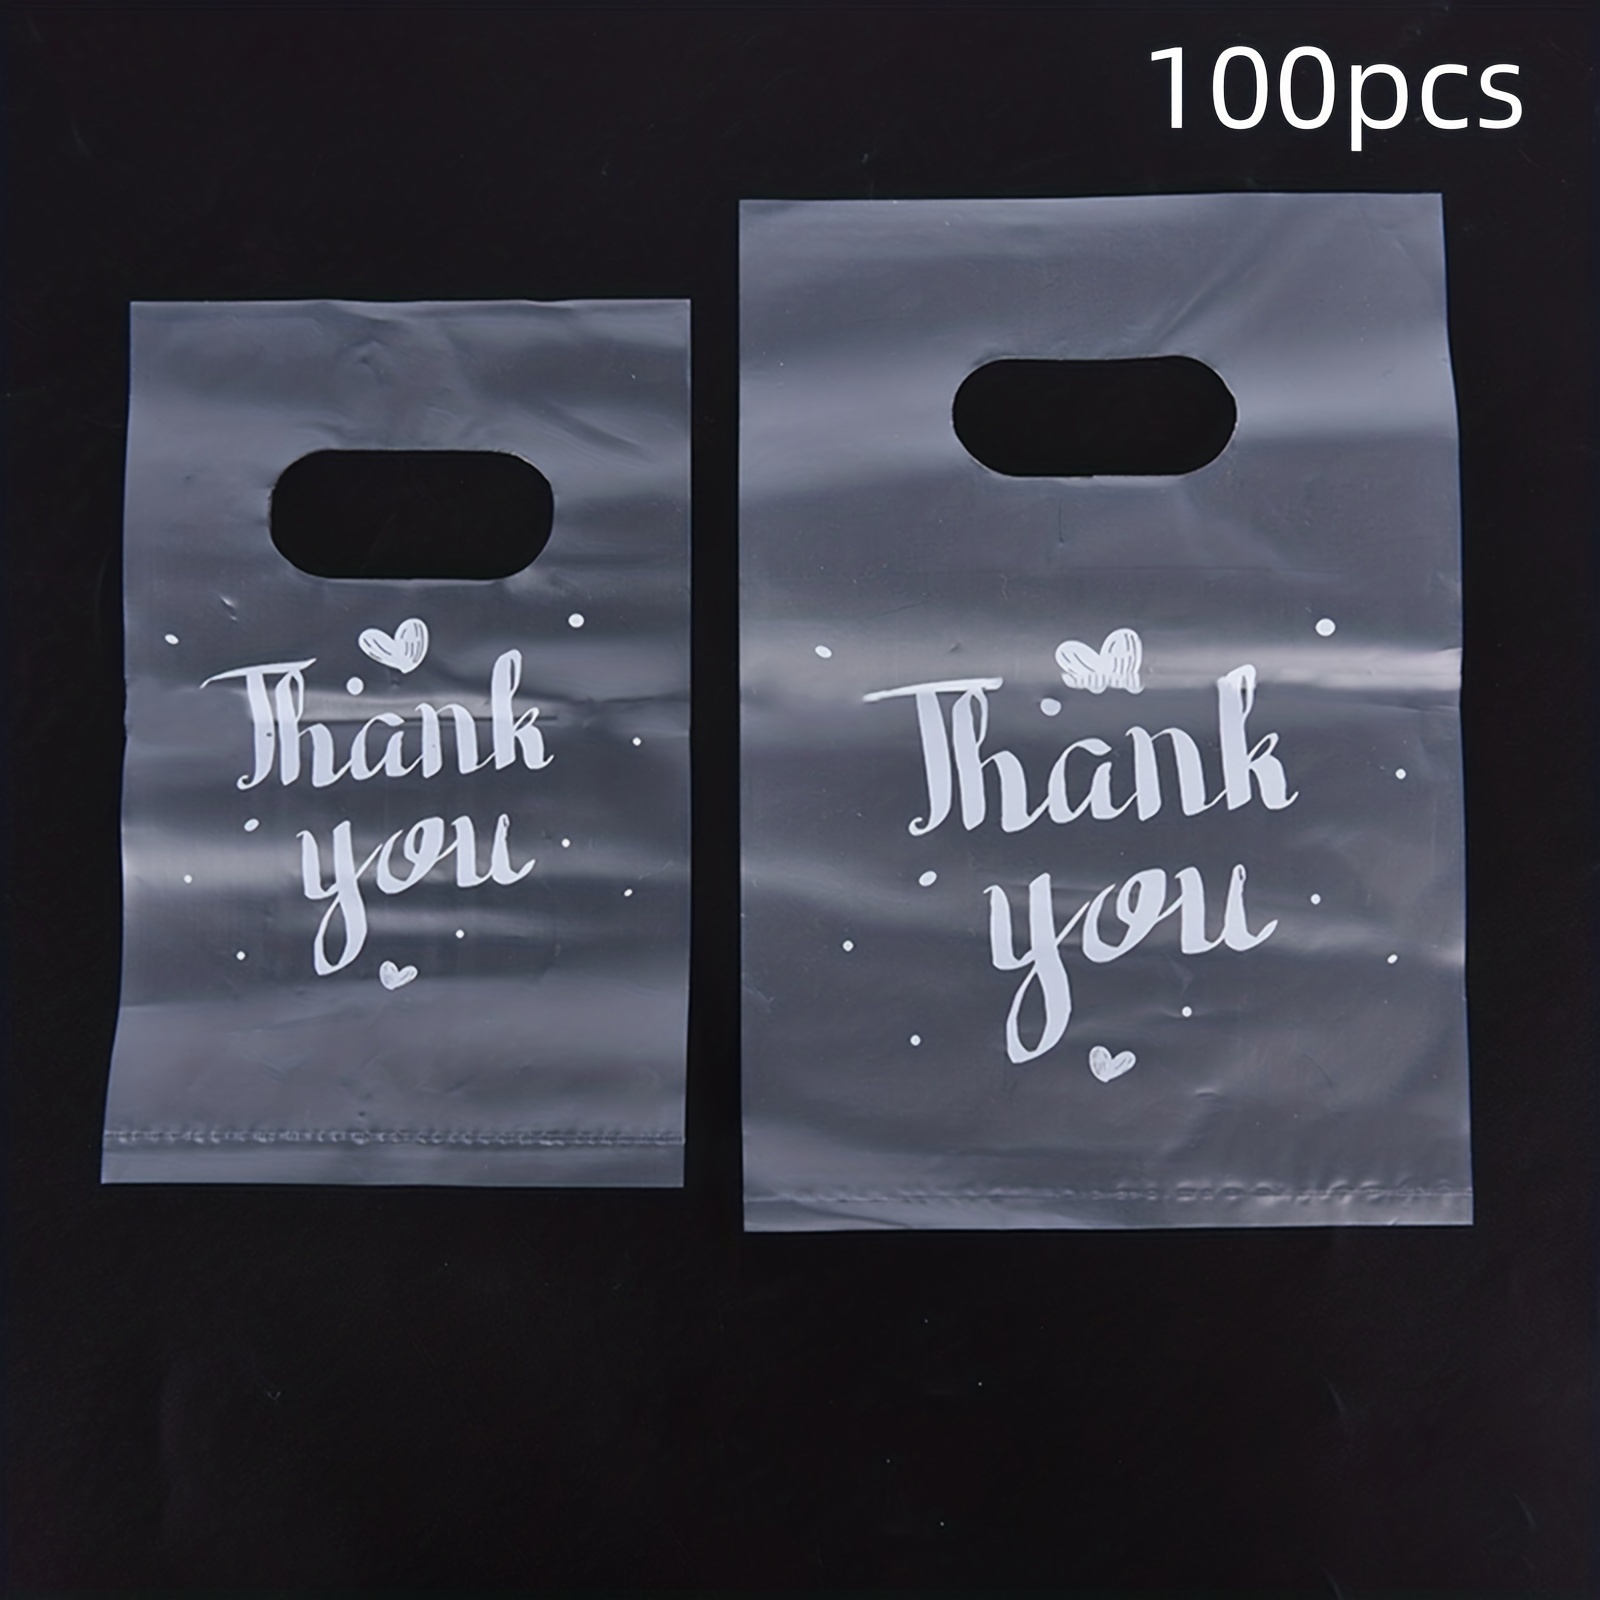 10Pcs Party Favor Plastic Bags, Thank You Bags, Small Goodie Bags for Kids,  Merchandise Bags for Small Business, Goody Bags for Weddings, Christmas